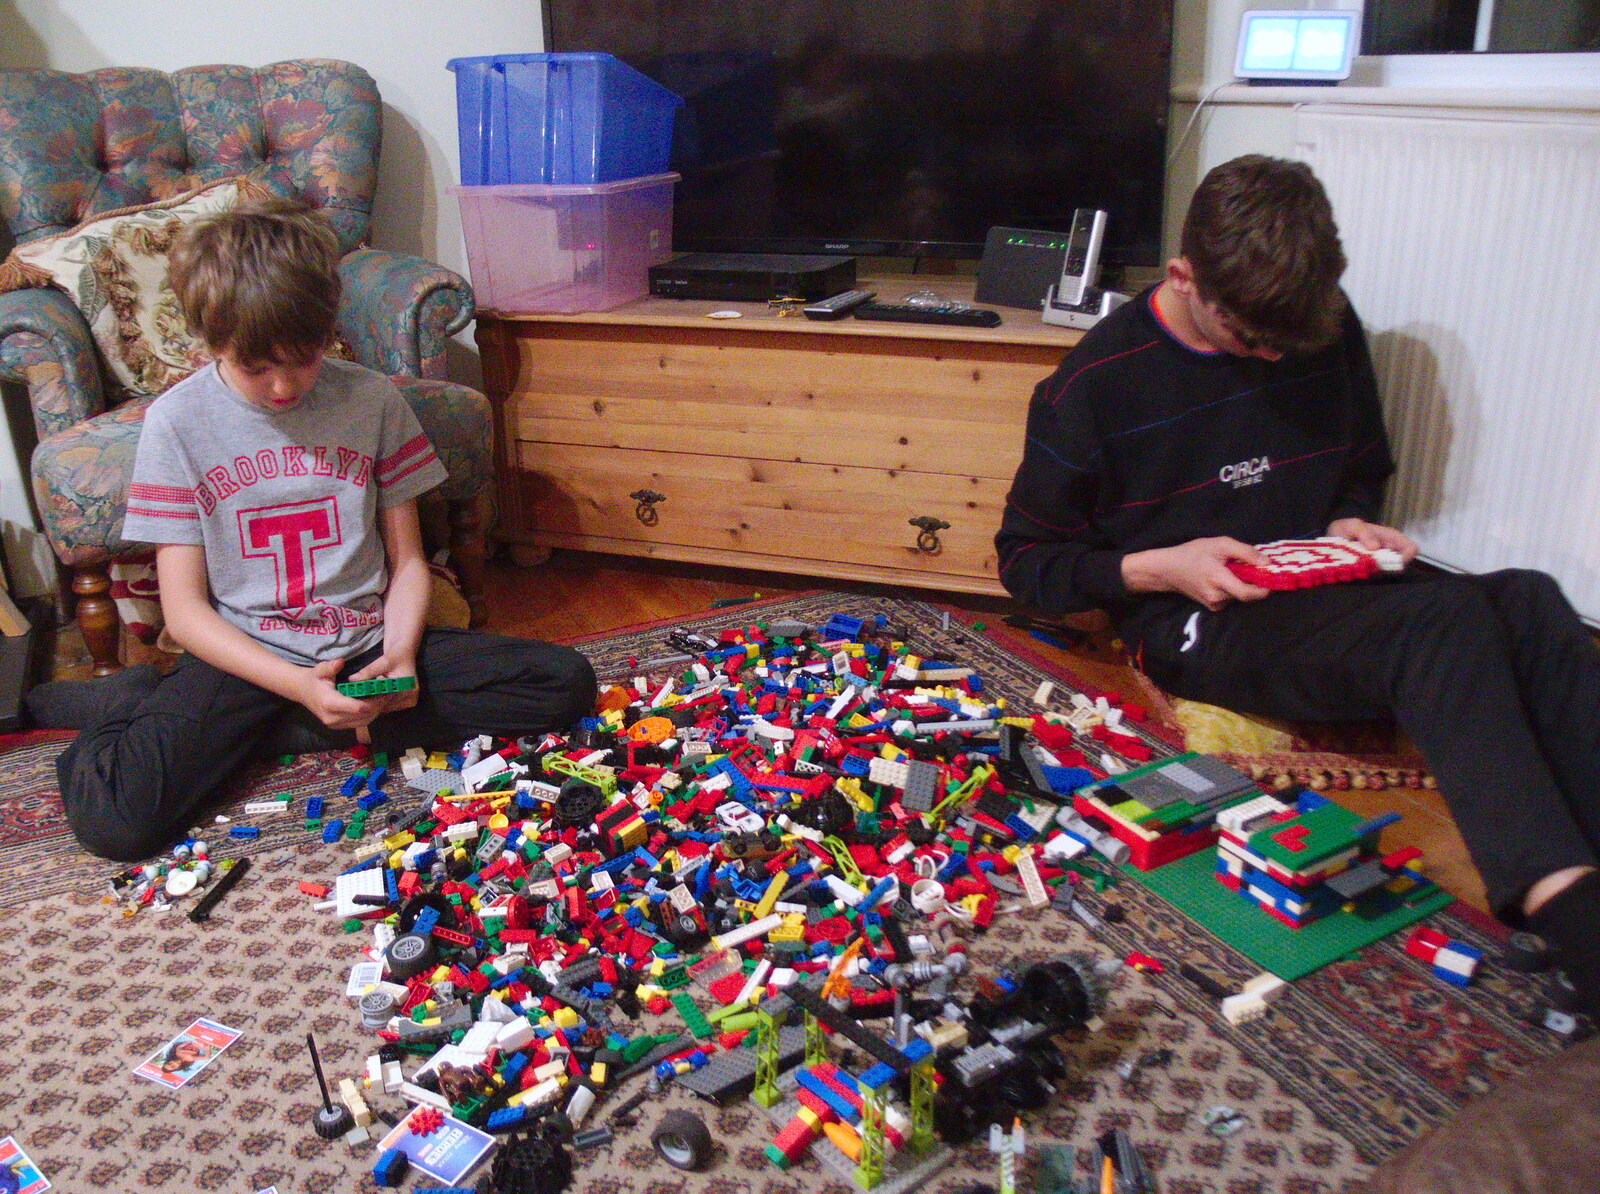 Fred and Rowan play Lego in the evening from A Day with Sean and Michelle, Walkford, Dorset - 21st September 2019